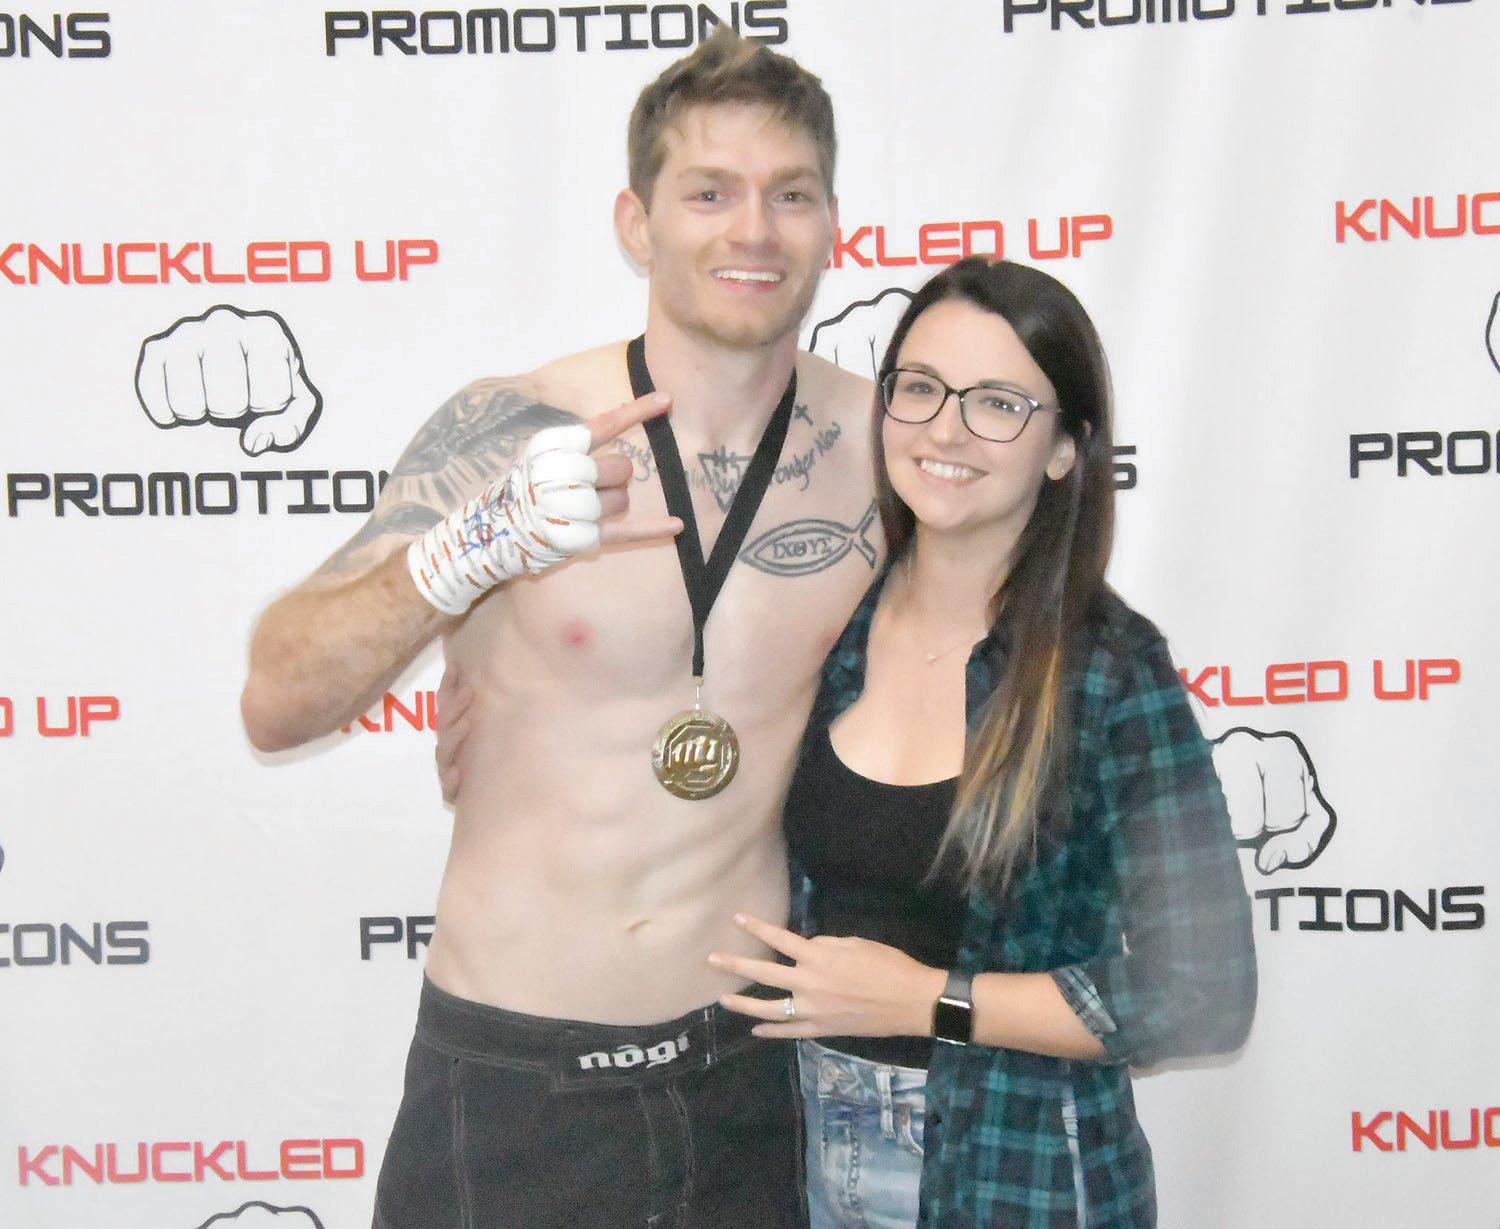 Mixed martial arts fighter Coty Penn, along with his wife Bethany, pose after Coty won his fight on a split decision. The bout was competitive, but Penn did enough to swing two judges' cards in his favor.